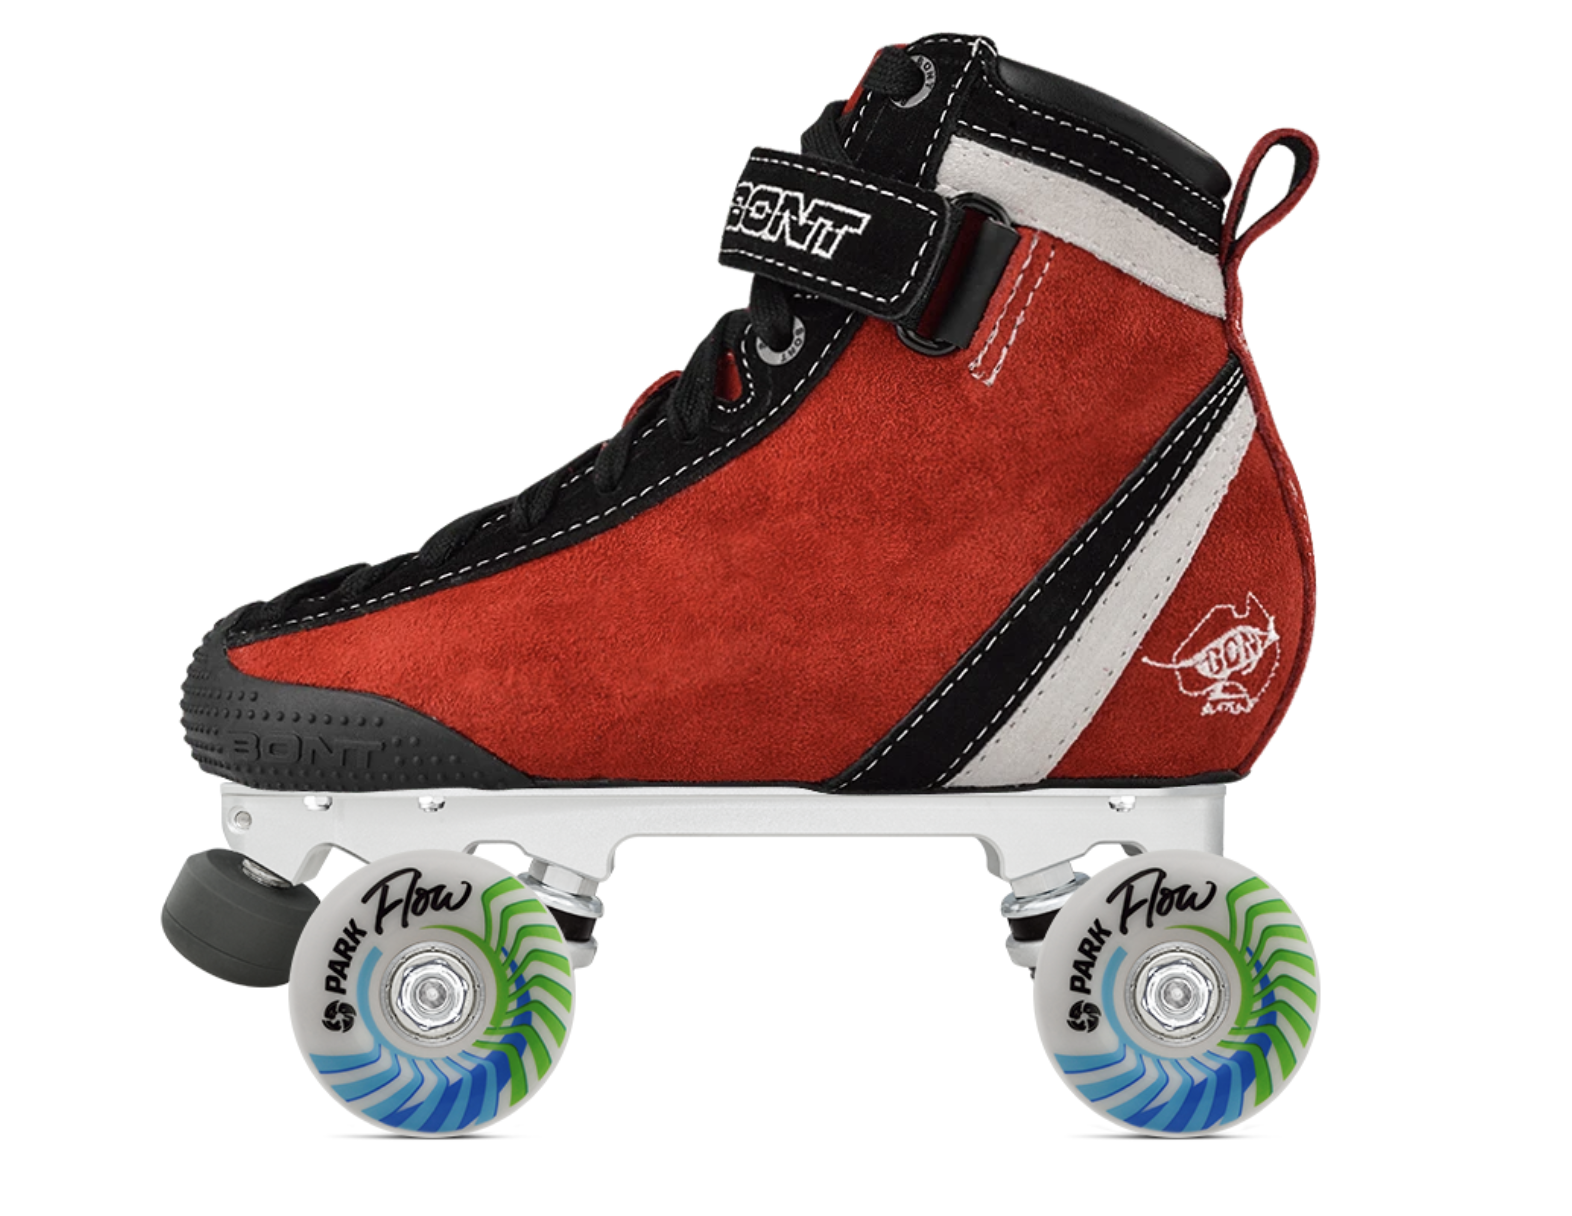 A red roller skate with blue, white, and green wheels